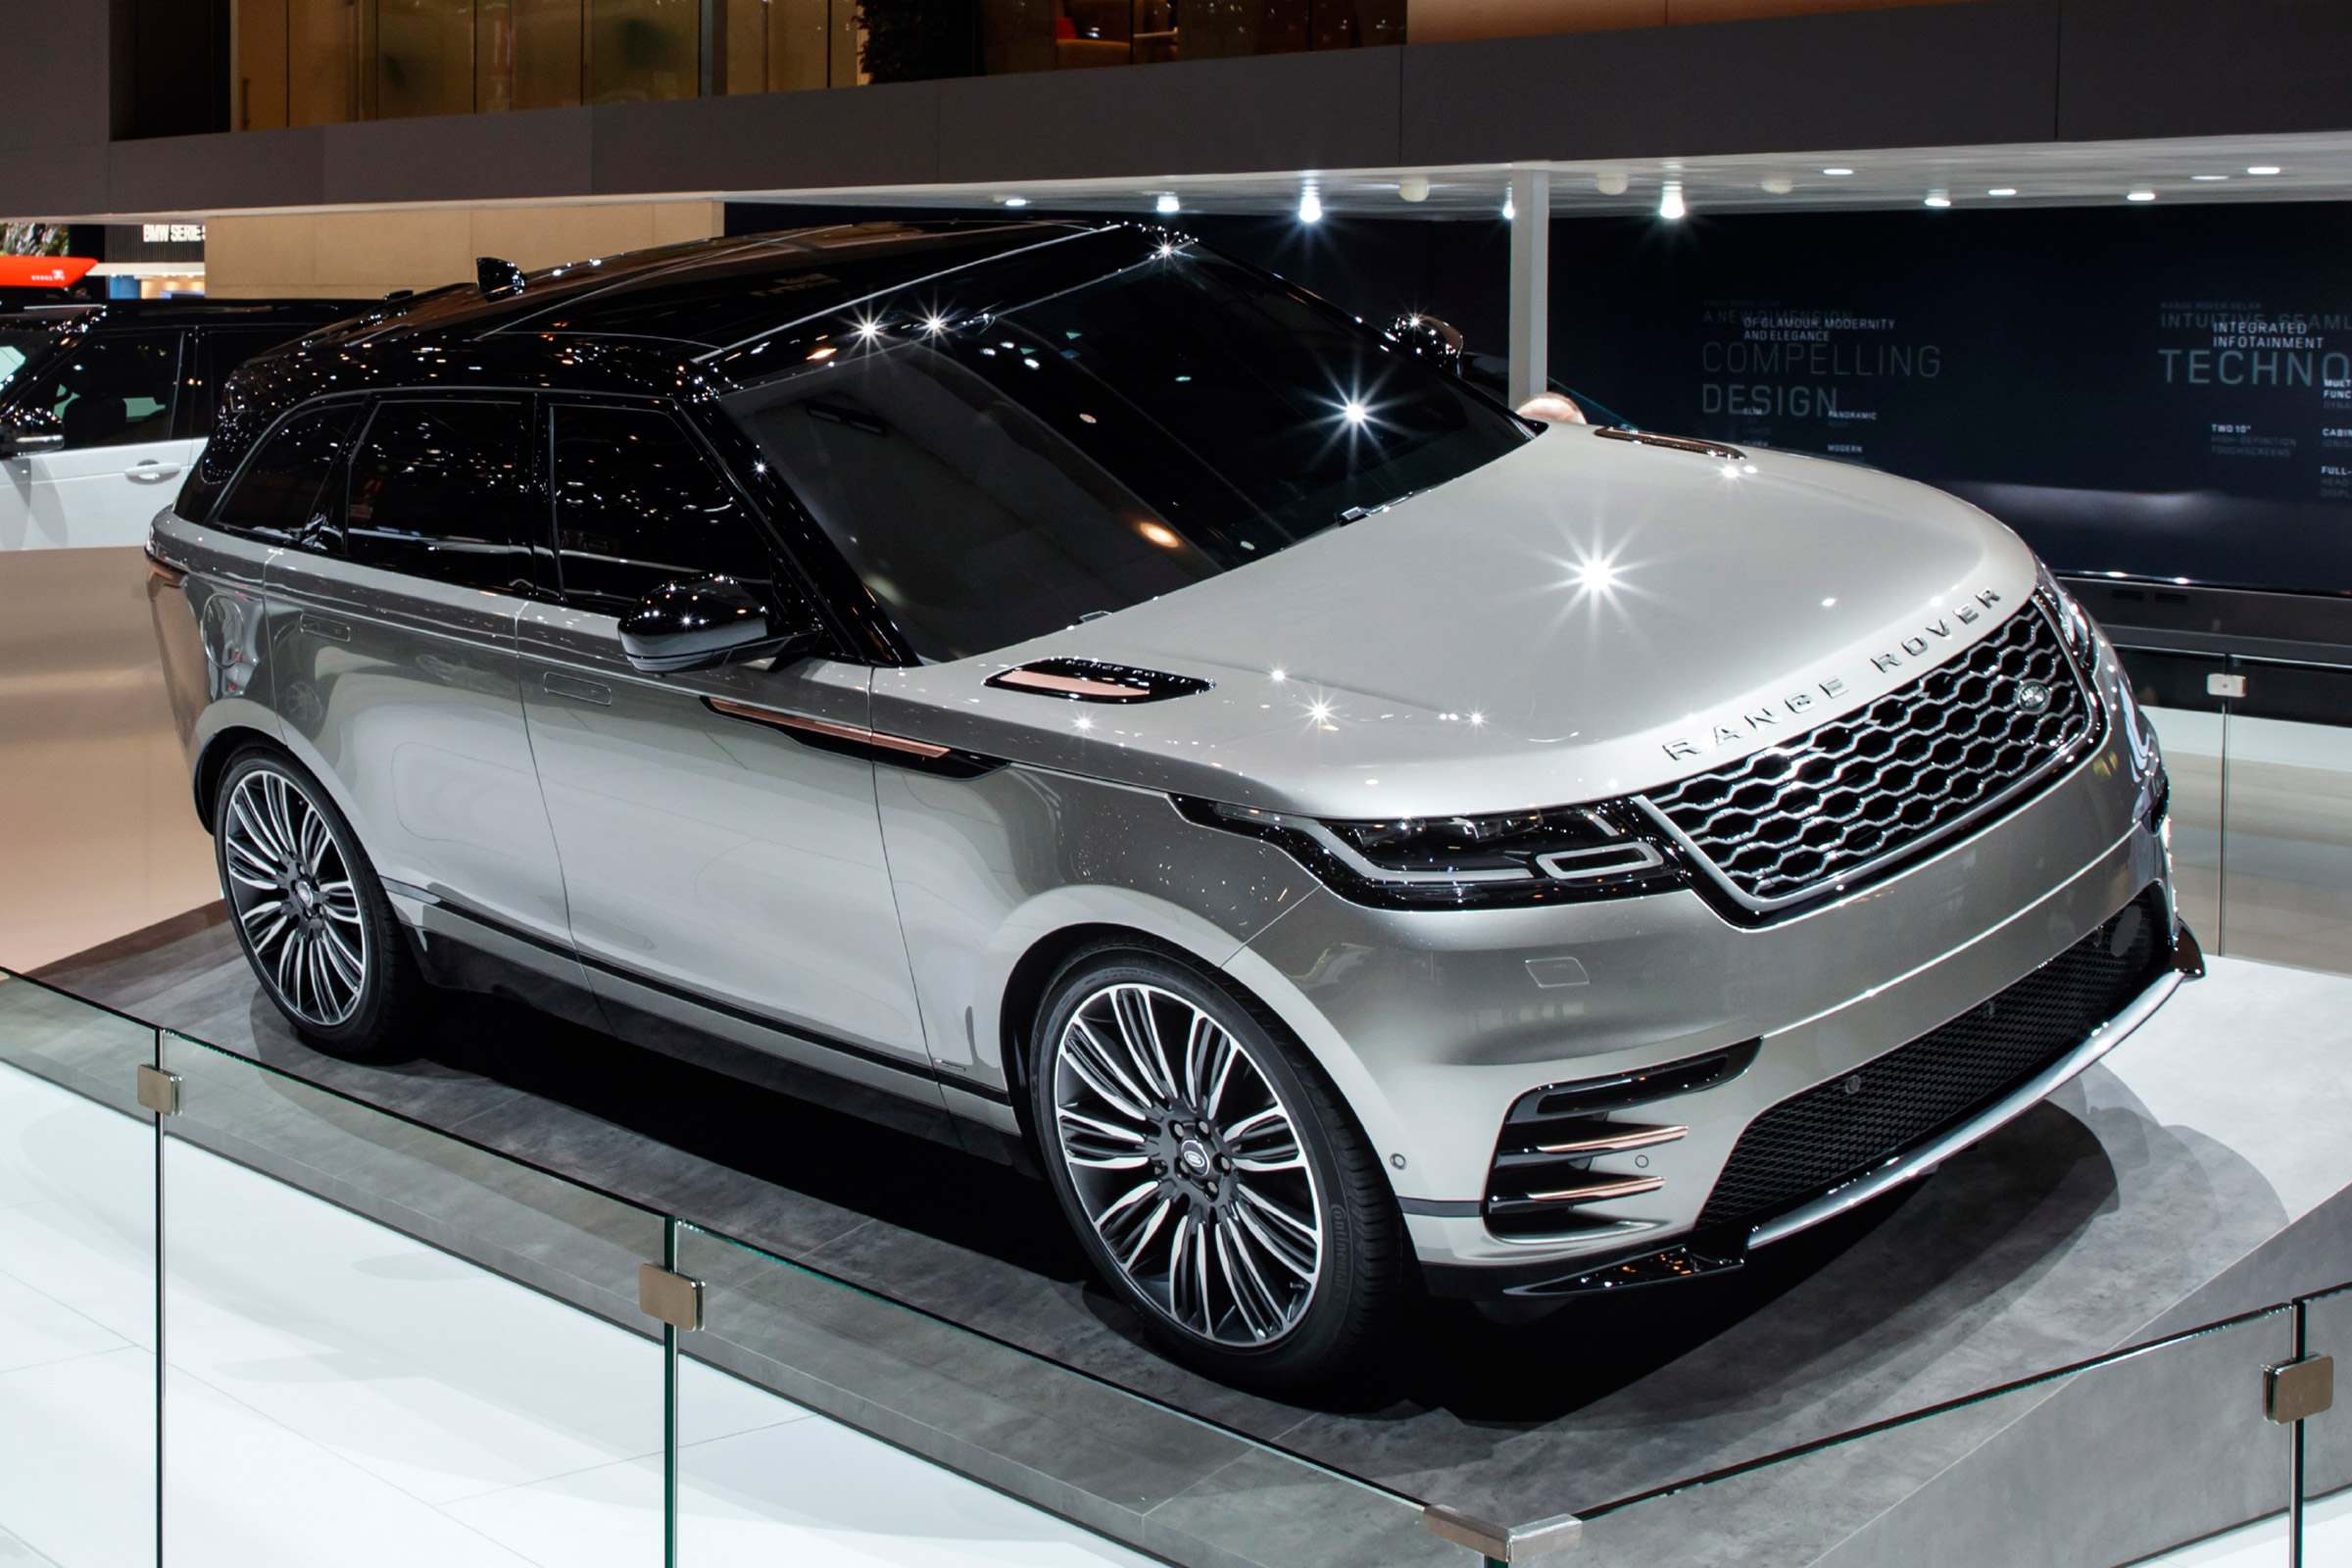 New Range Rover Velar Suv Revealed Geneva Debut Specs Prices Pictures And Video Auto Express